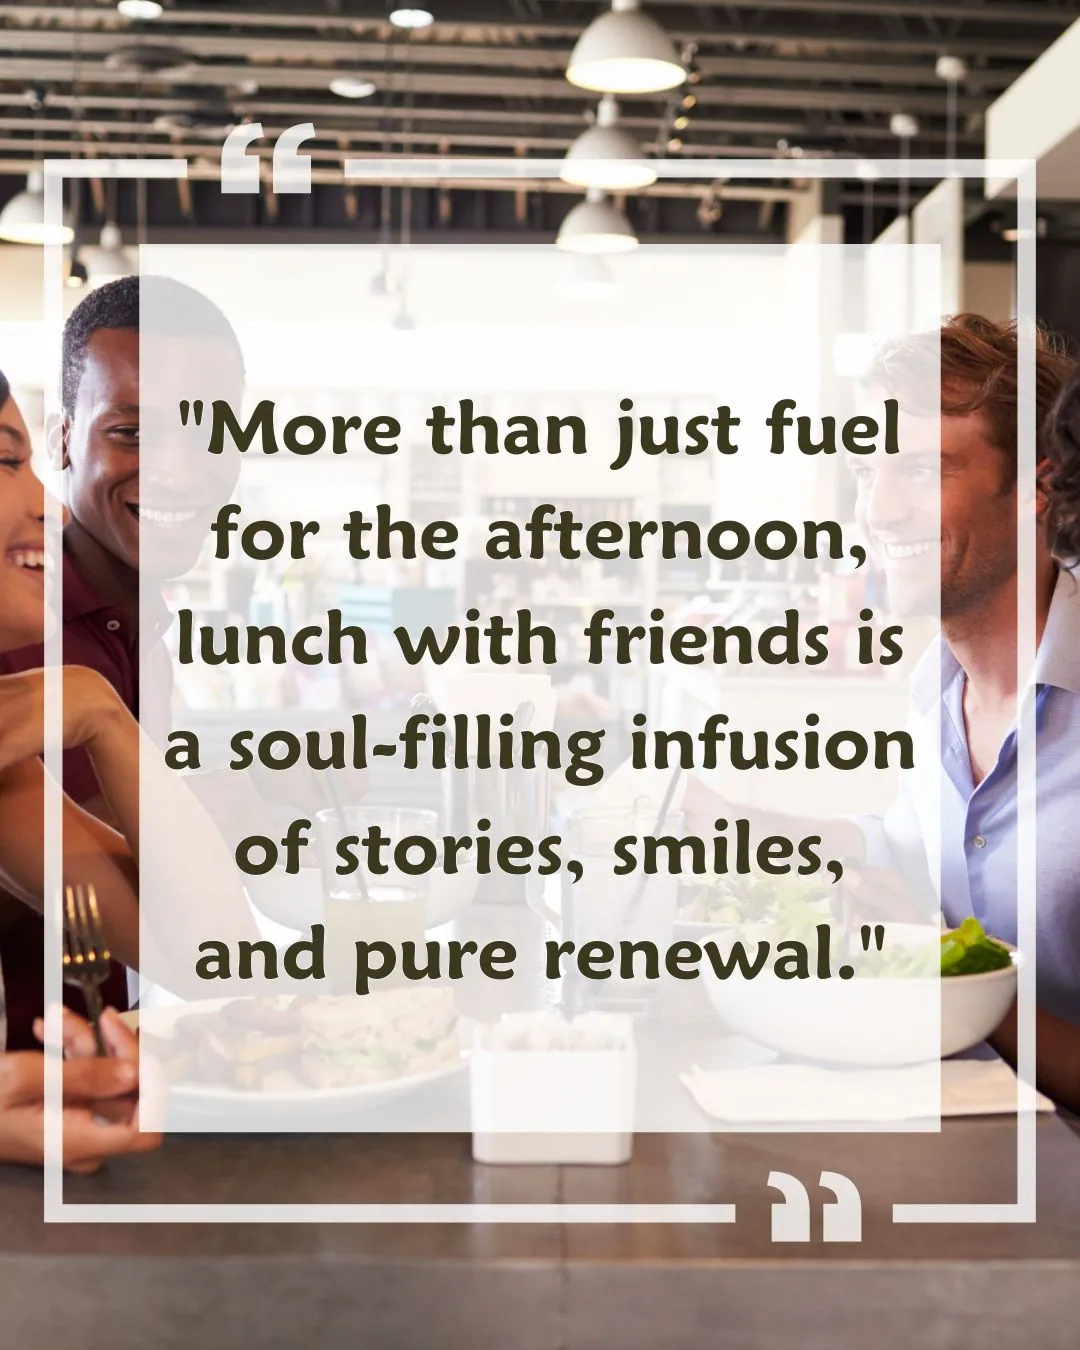 Happy Lunch with Friends quotes with Image 1